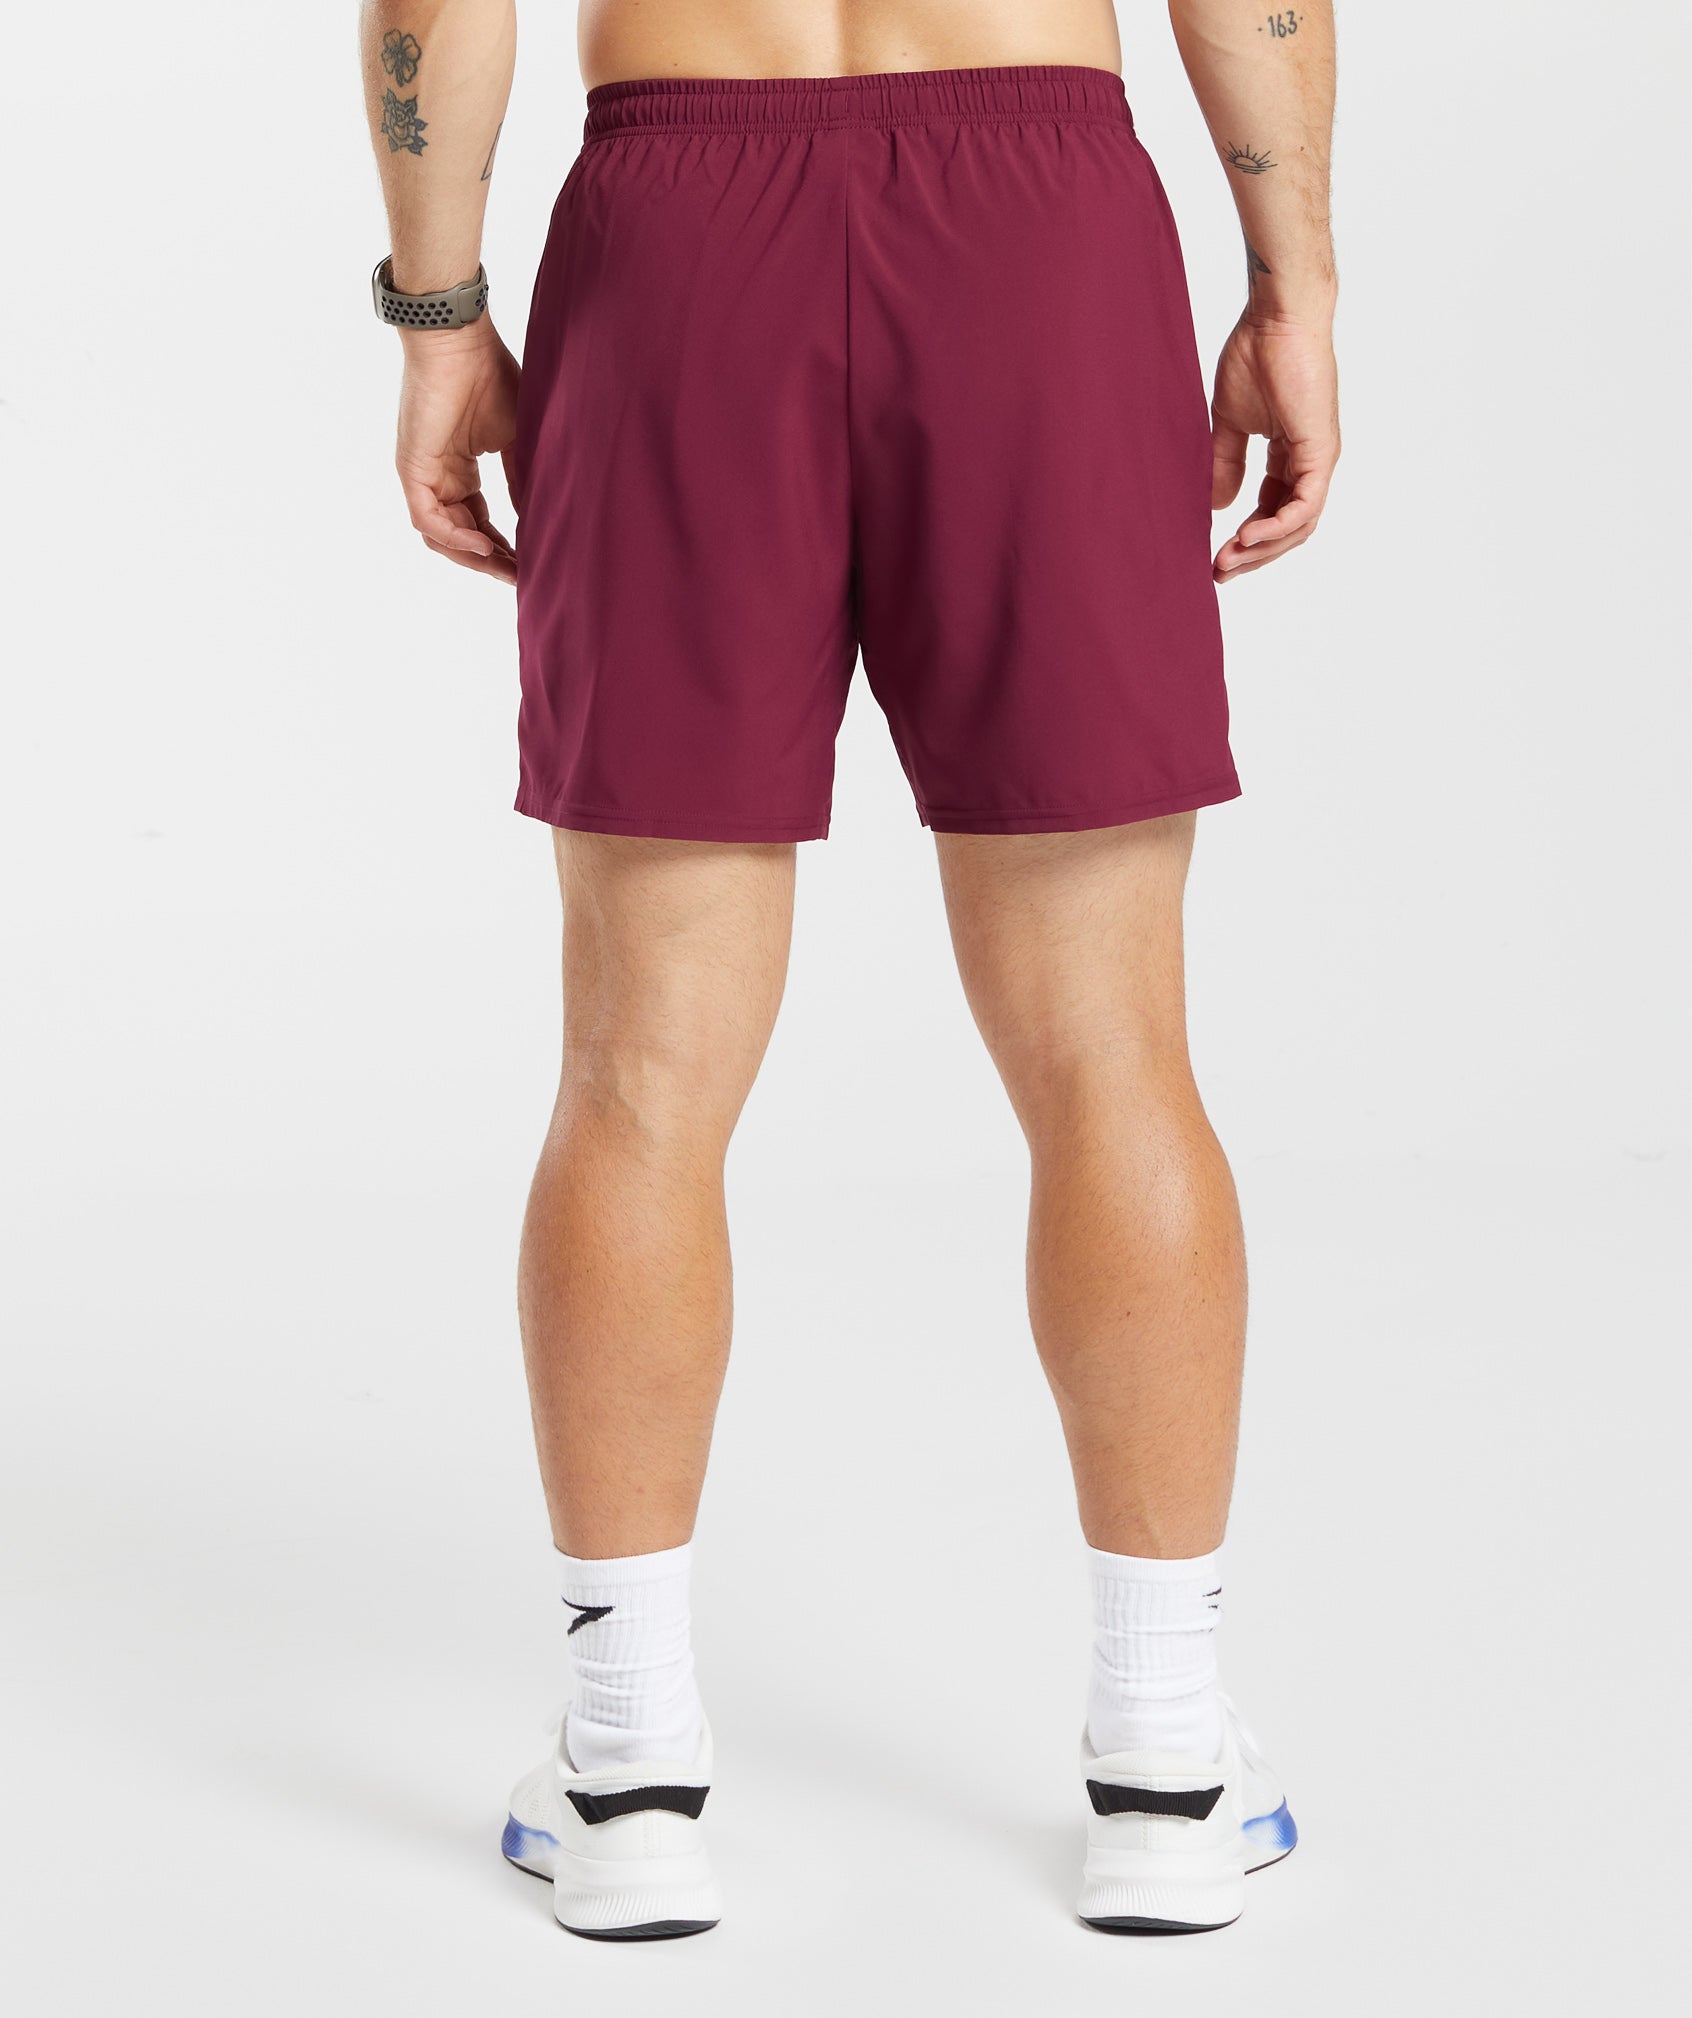 Arrival 7" Shorts in Plum Pink - view 2